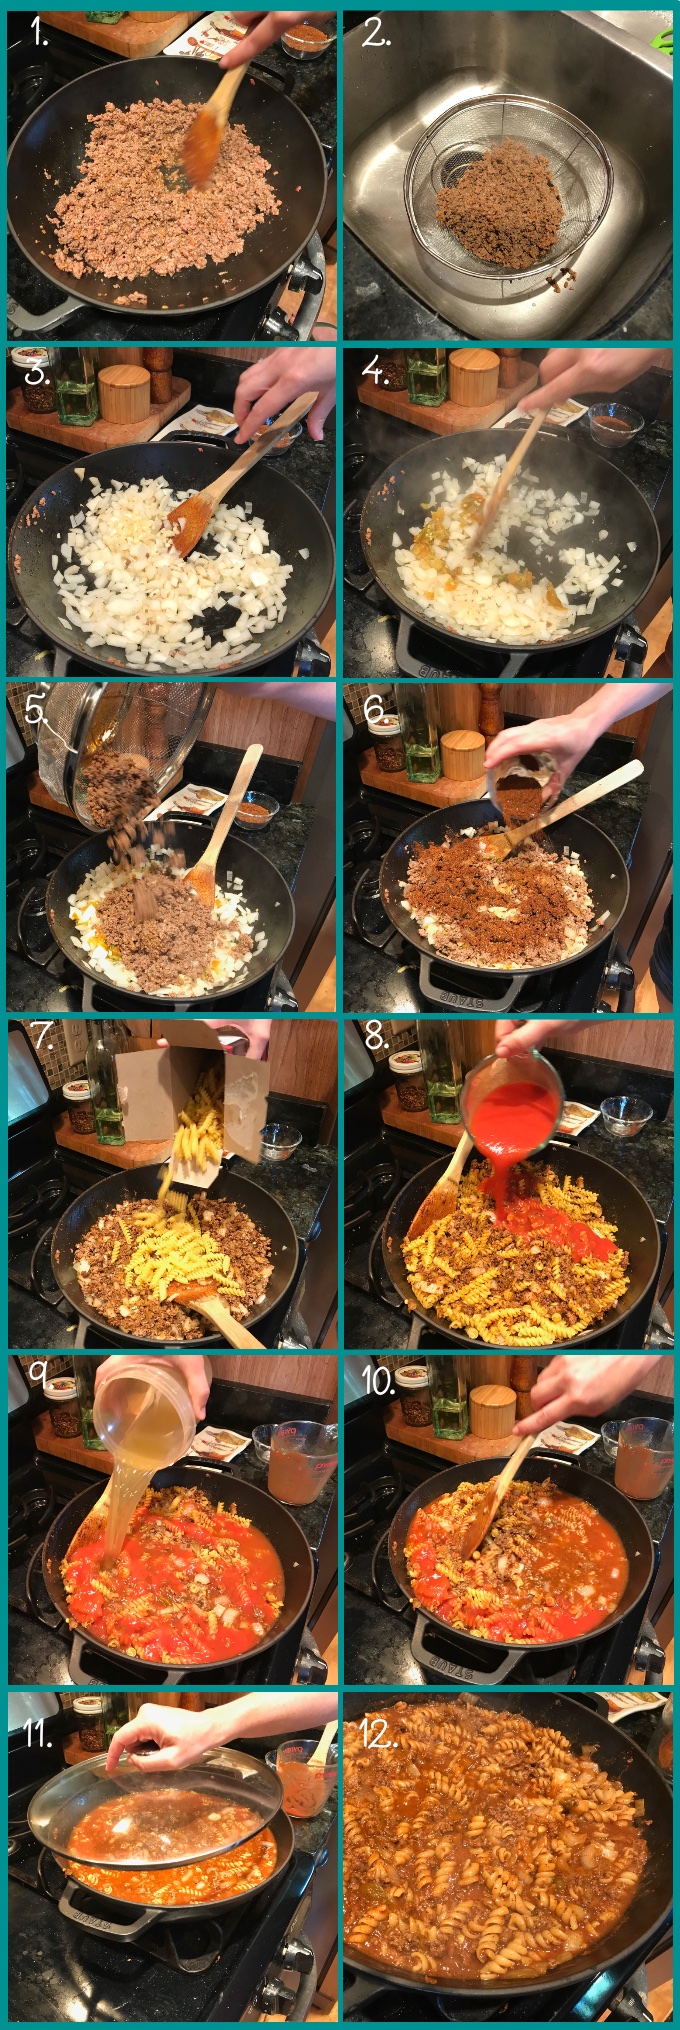 One-Skillet Taco Pasta preparation steps. 1. Brown meat. 2. Drain meat. 3. Add onions and 4. saute until soft and translucent. 5. Add roasted green chiles (or red bell pepper). 5. add meat back to the skillet. 6. Add spices and saute. 7. Add pasta. 8. Add tomato sauce. 9. Add broth. 10. Mix. 11. Lid the skillet and simmer, stirring occasionally. 12. Check pasta for doneness and sauce for seasoning. Serve with your favorite toppings.